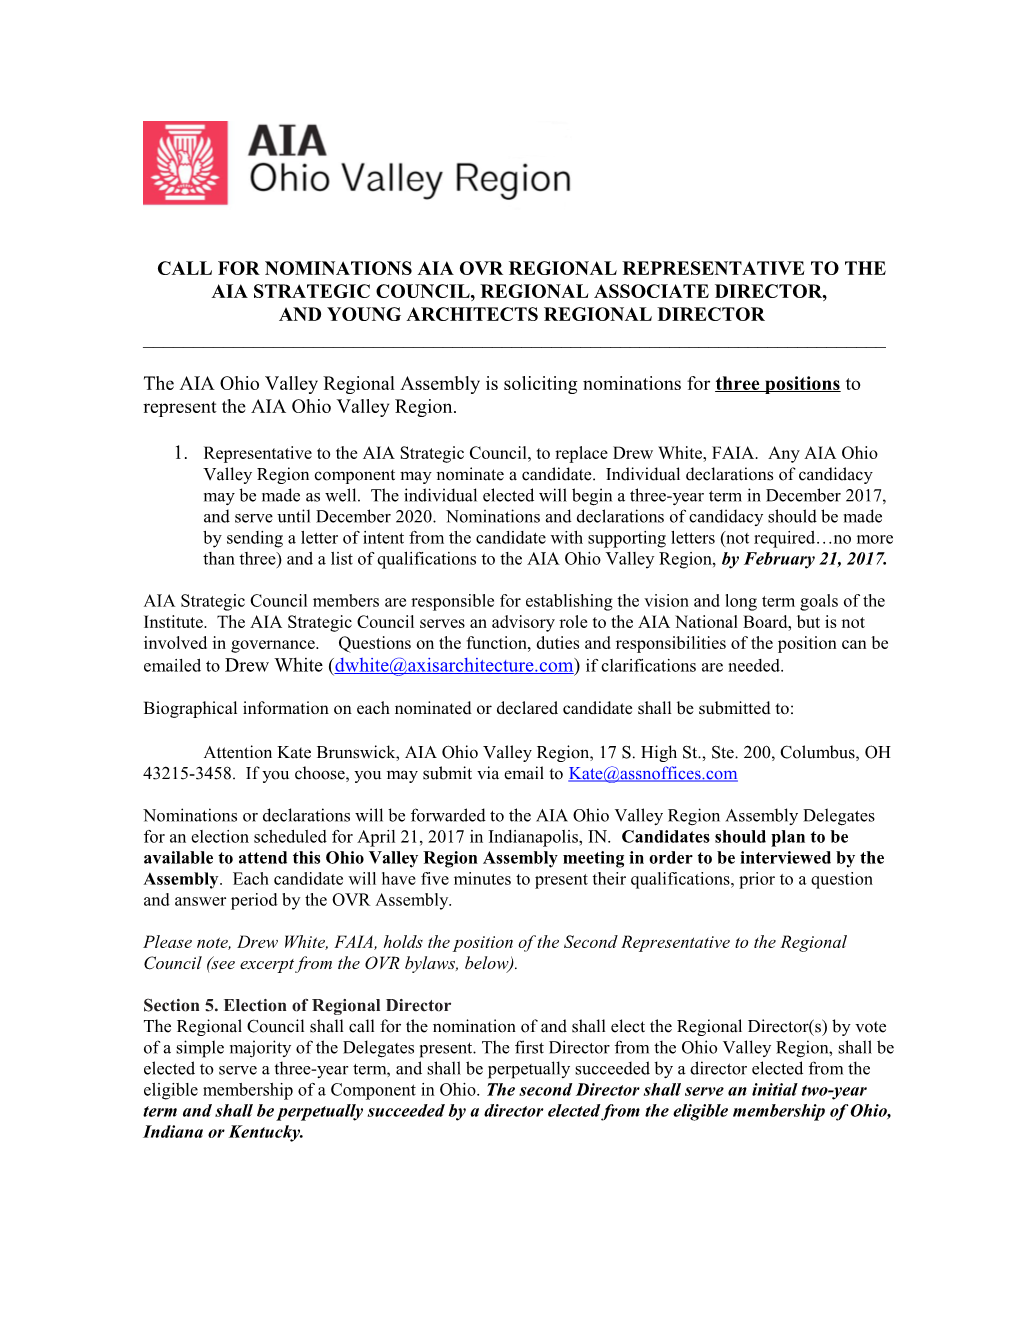 Call for Nominations Aia Ovr Regional Representative to the Aia Strategic Council, Regional